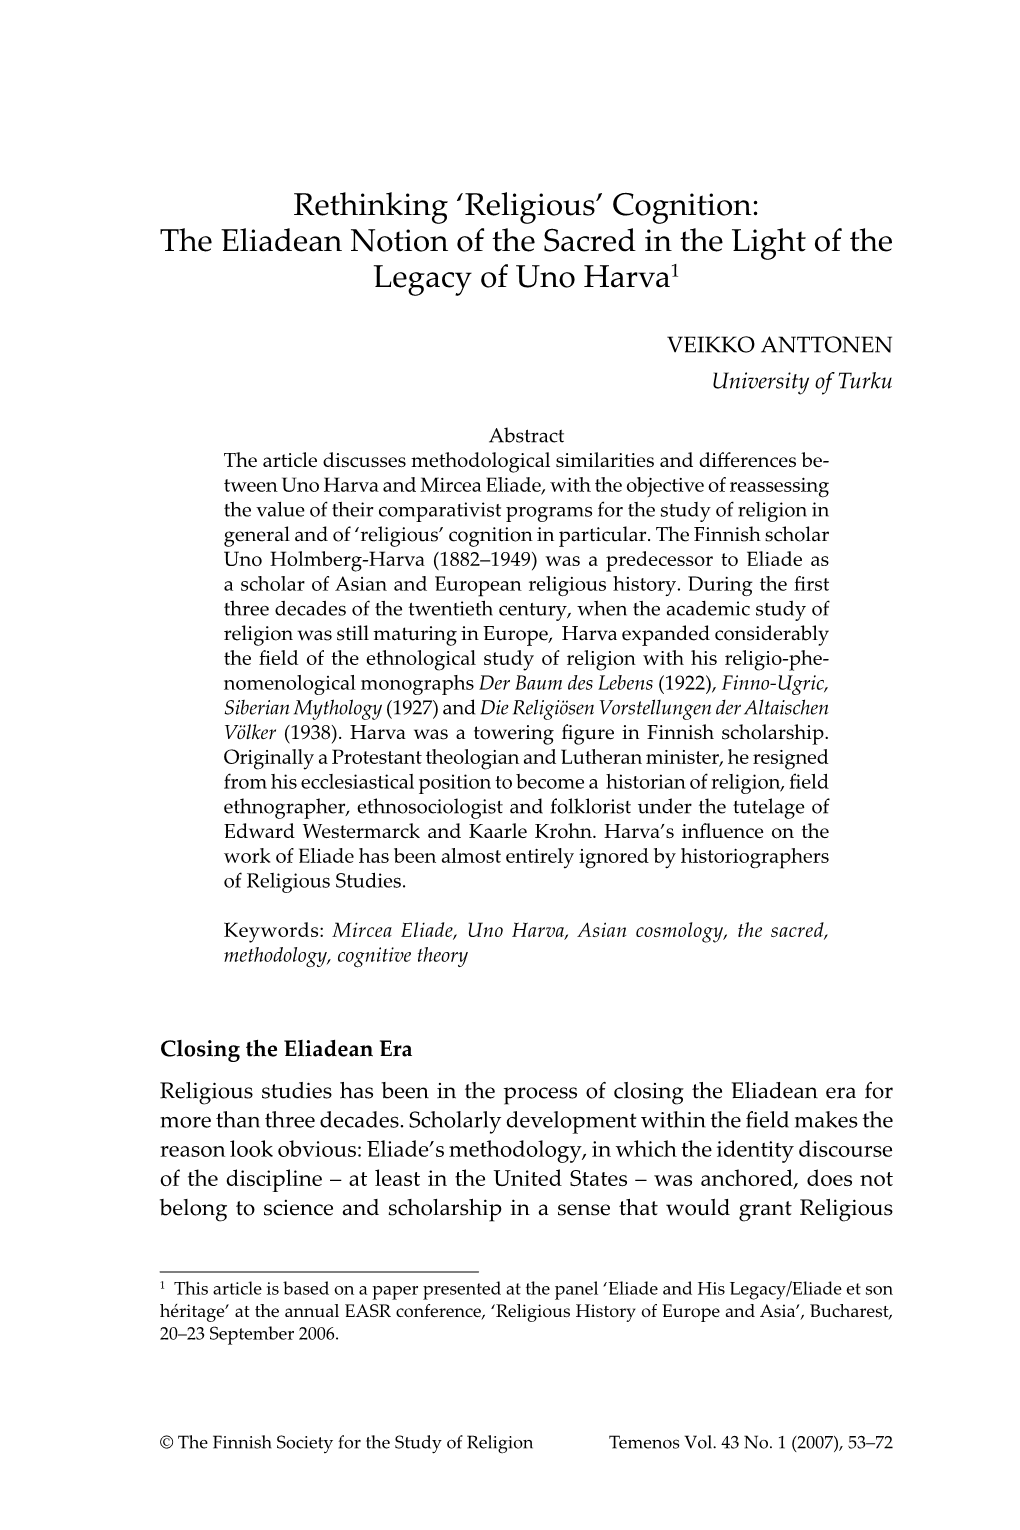 Religious’ Cognition: the Eliadean Notion of the Sacred in the Light of the Legacy of Uno Harva1